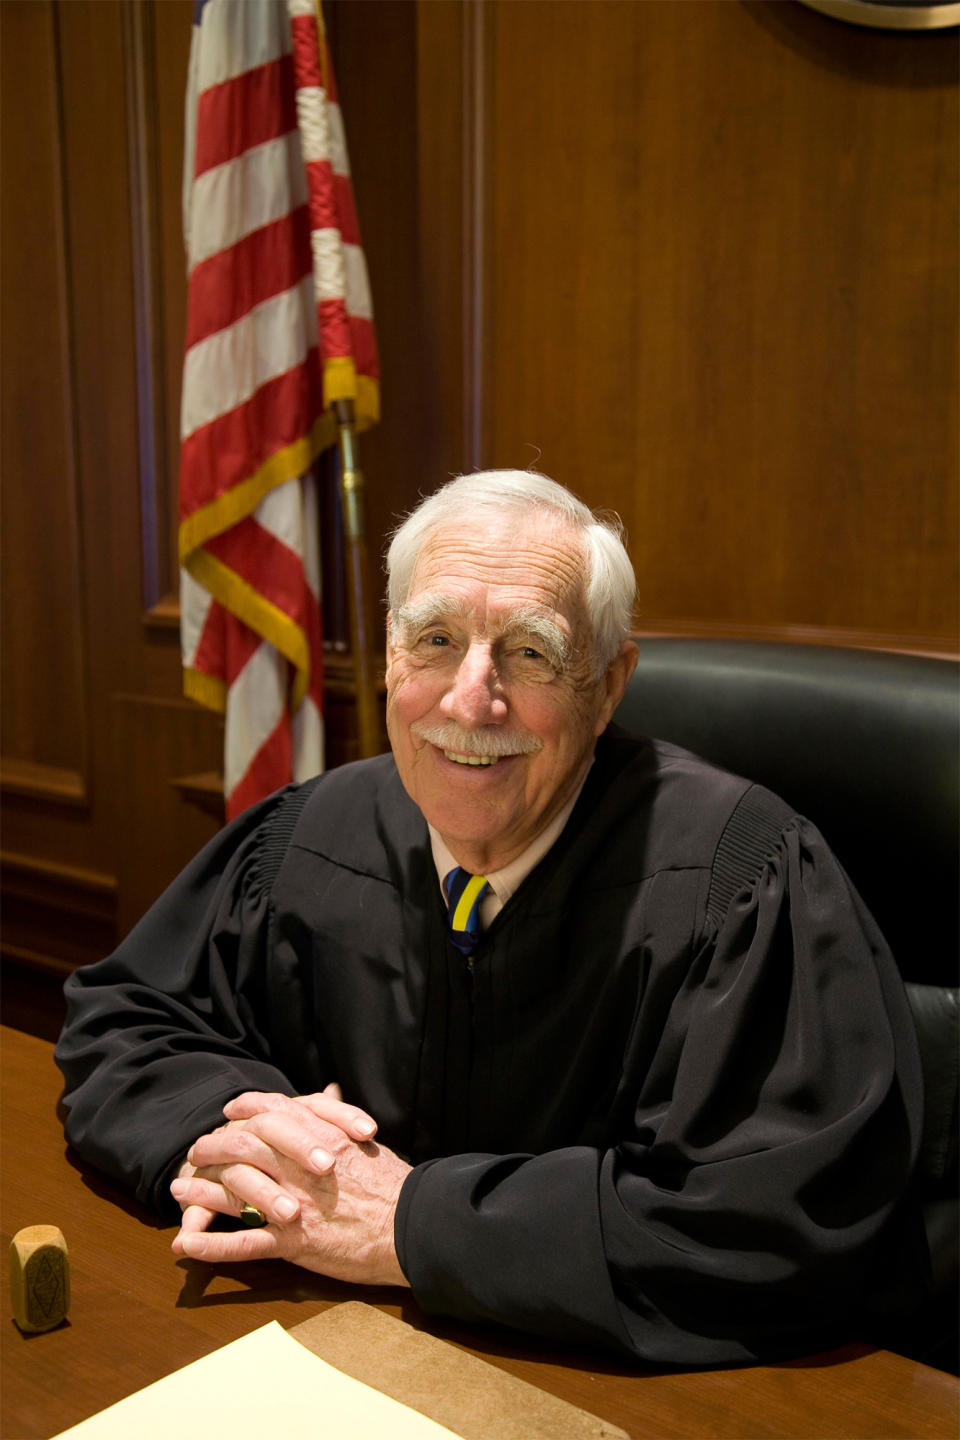 FILE- This Feb. 18, 2009, file photo, provided by The Taft School, shows Judge Robert Sweet. Sweet, who is closing in on his 90th birthday, skis, ice skates, plays tennis and has no intention of leaving the bench anytime soon. Unlike most people their age, New York City’s federal judges prefer to strike one topic from the record: retirement. The federal judicial system has become a case study in how the country will cope in coming decades with a graying America, where each economic crisis increases the likelihood that more people must work beyond 65. (AP Photo/The Taft School, Joe Lawton)